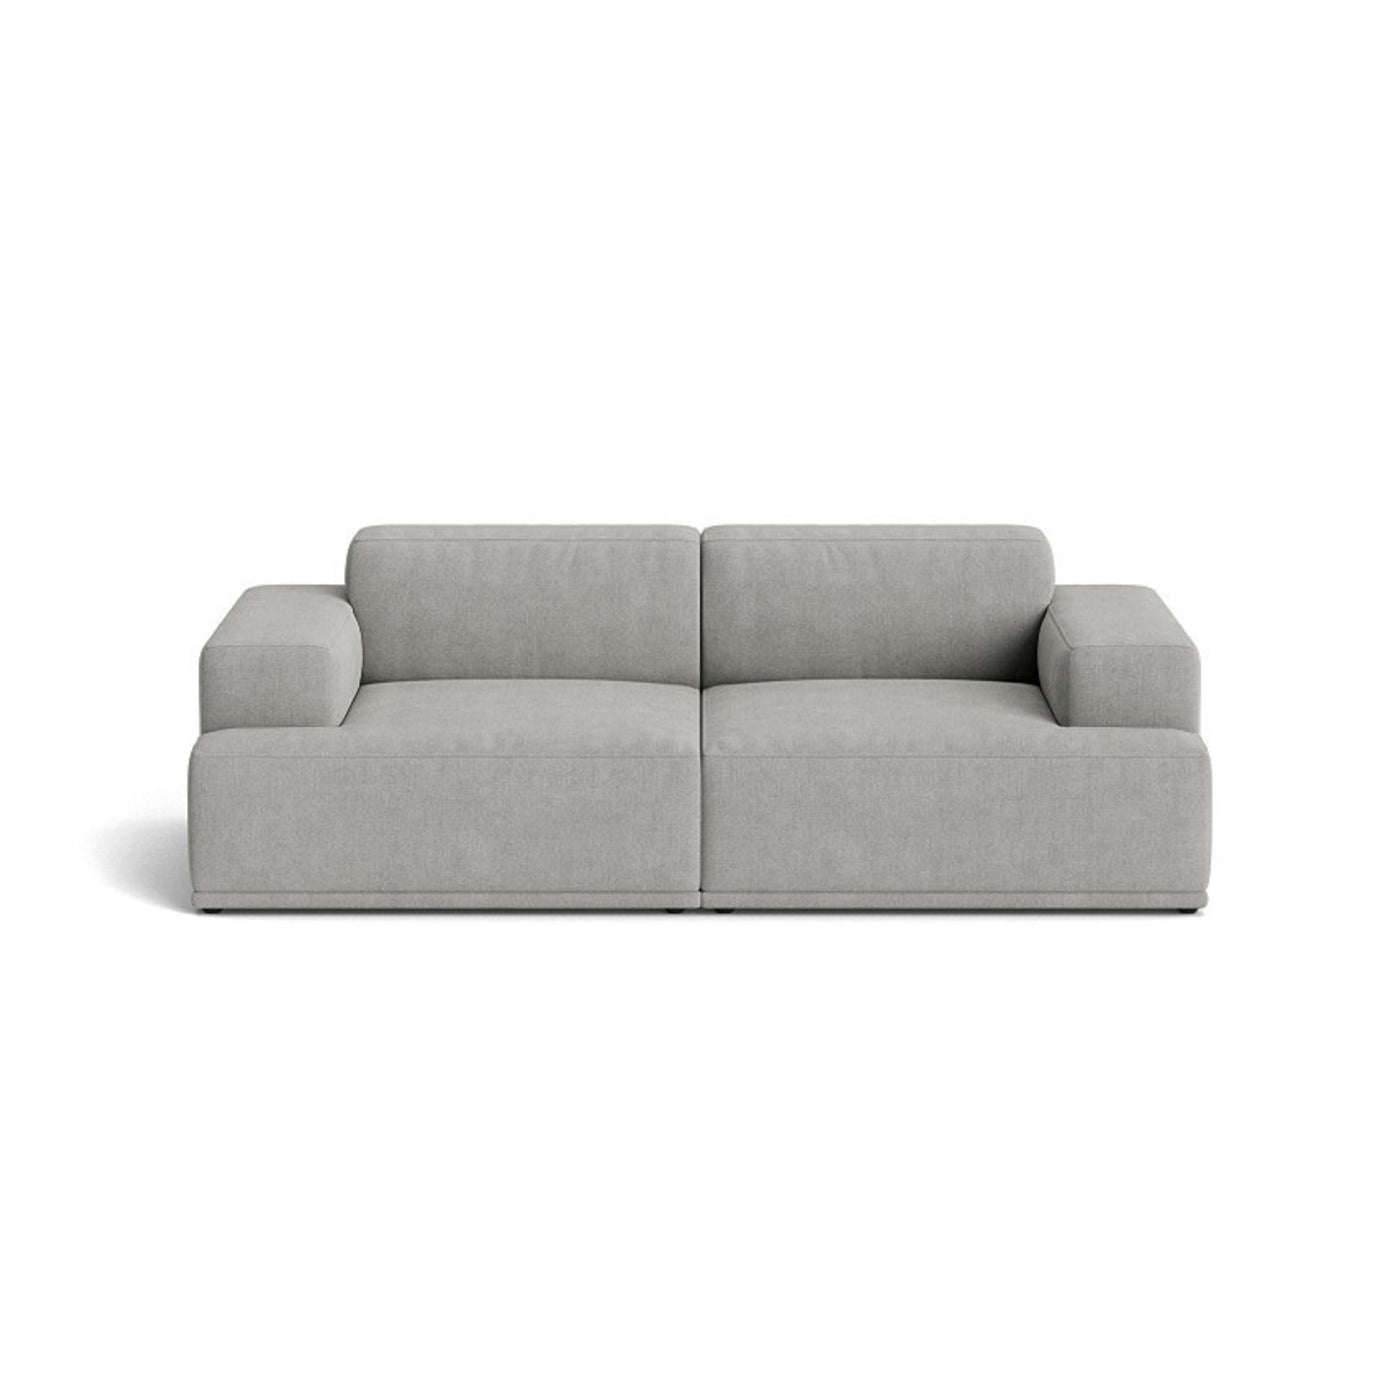 Muuto Connect Soft Modular 2 Seater Sofa, configuration 1. made-to-order from someday designs. #colour_remix-133